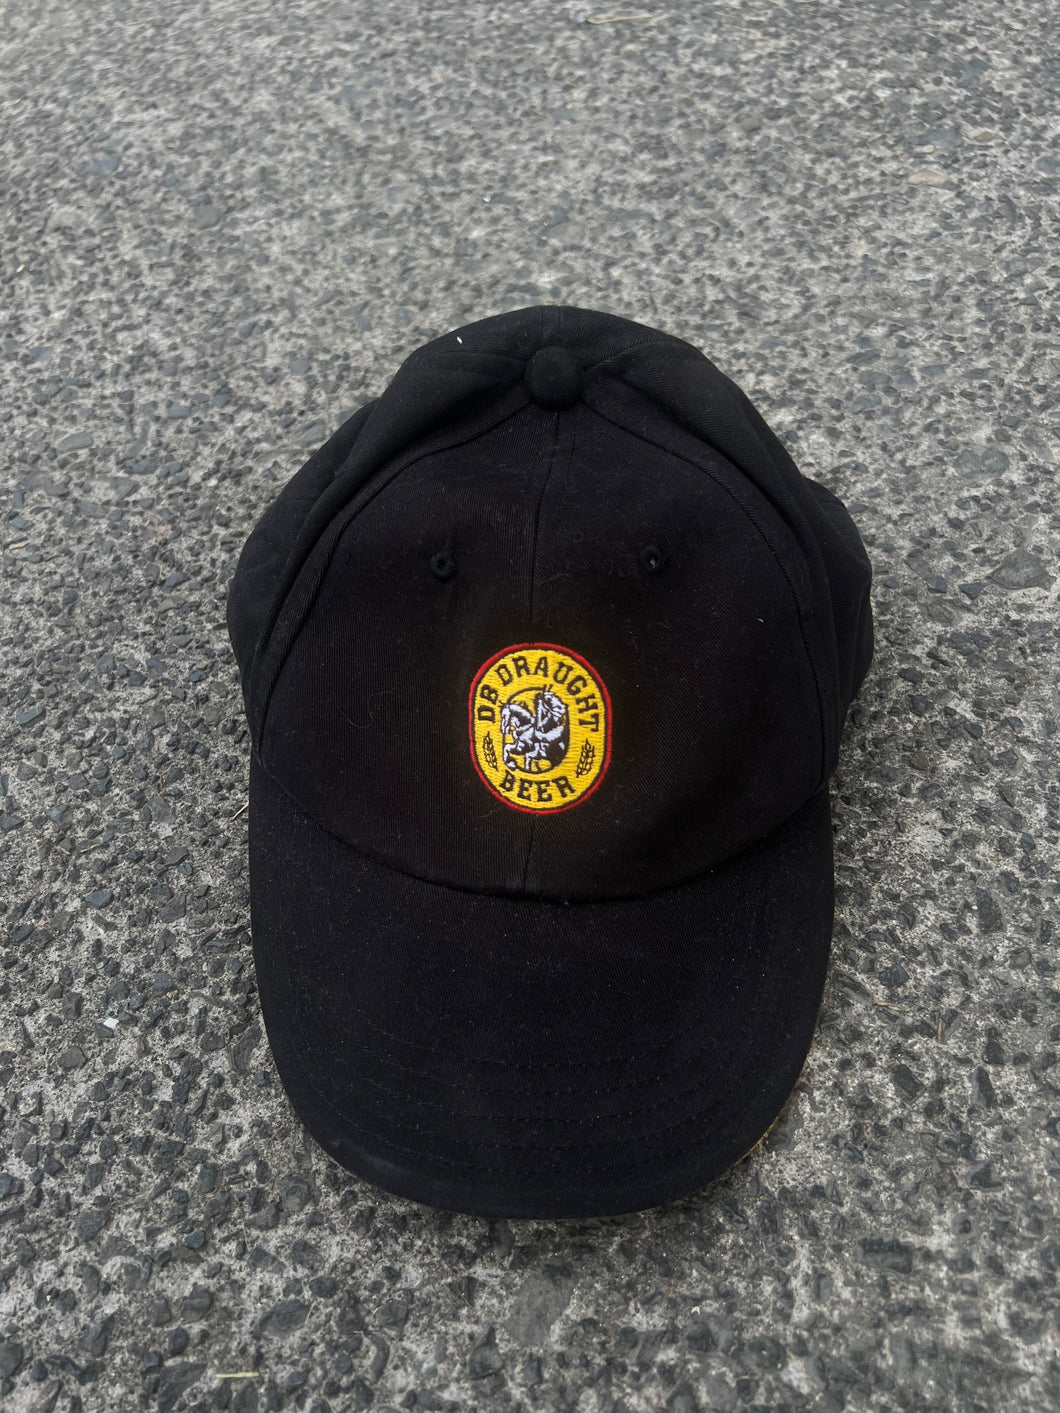 DB BITTER BEER DAD HAT - ONE SIZE FITS ALL - OSFA